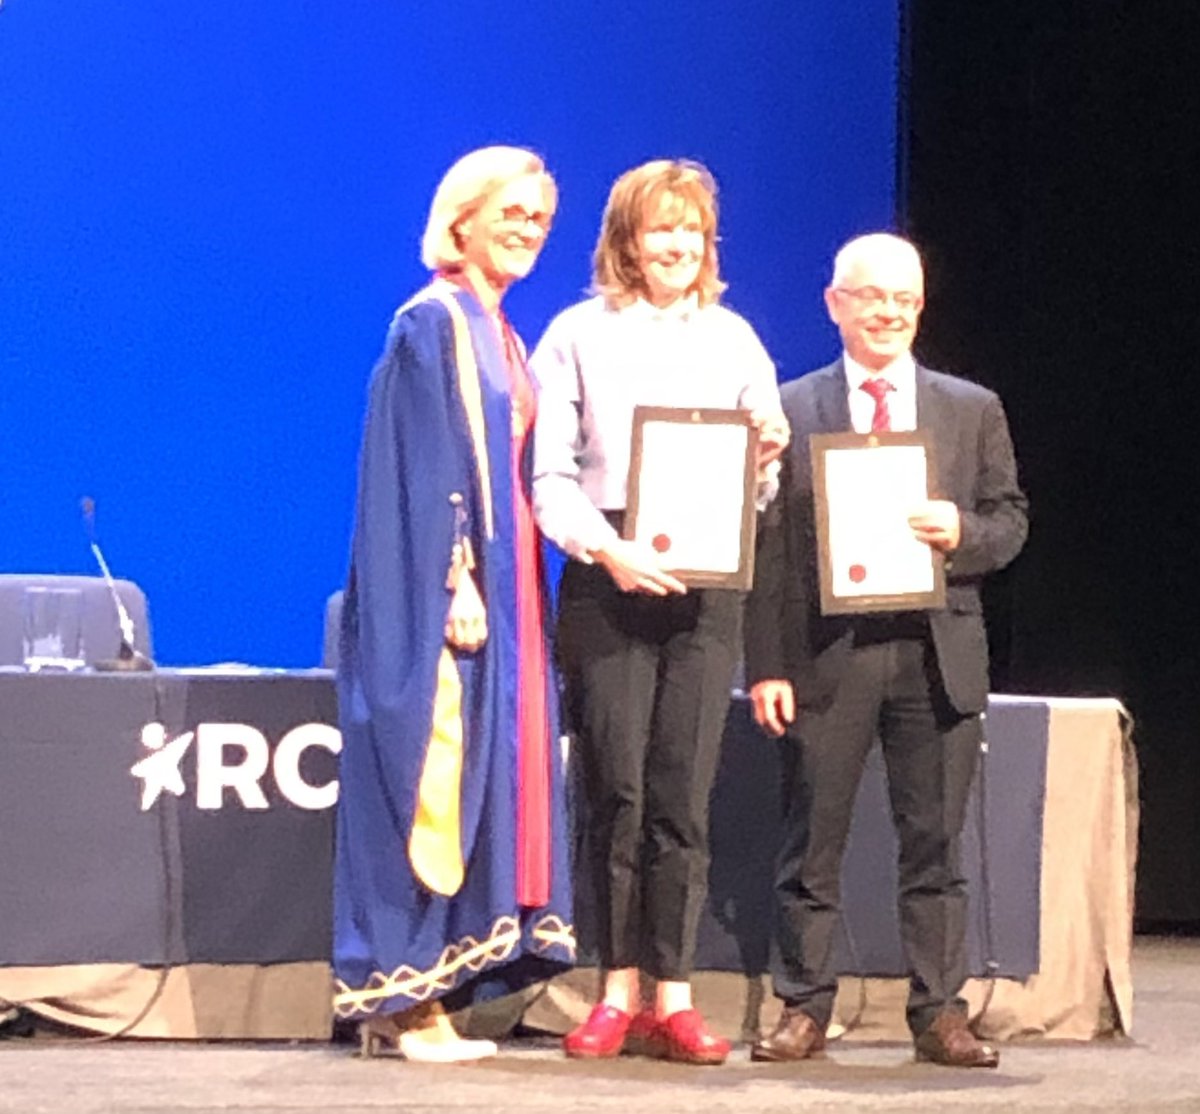 Many congratulations @Katie__Barnes on your recognition by the @RCPCHtweets for your ACP Leadership #rcpch24 @WeCYPnurses